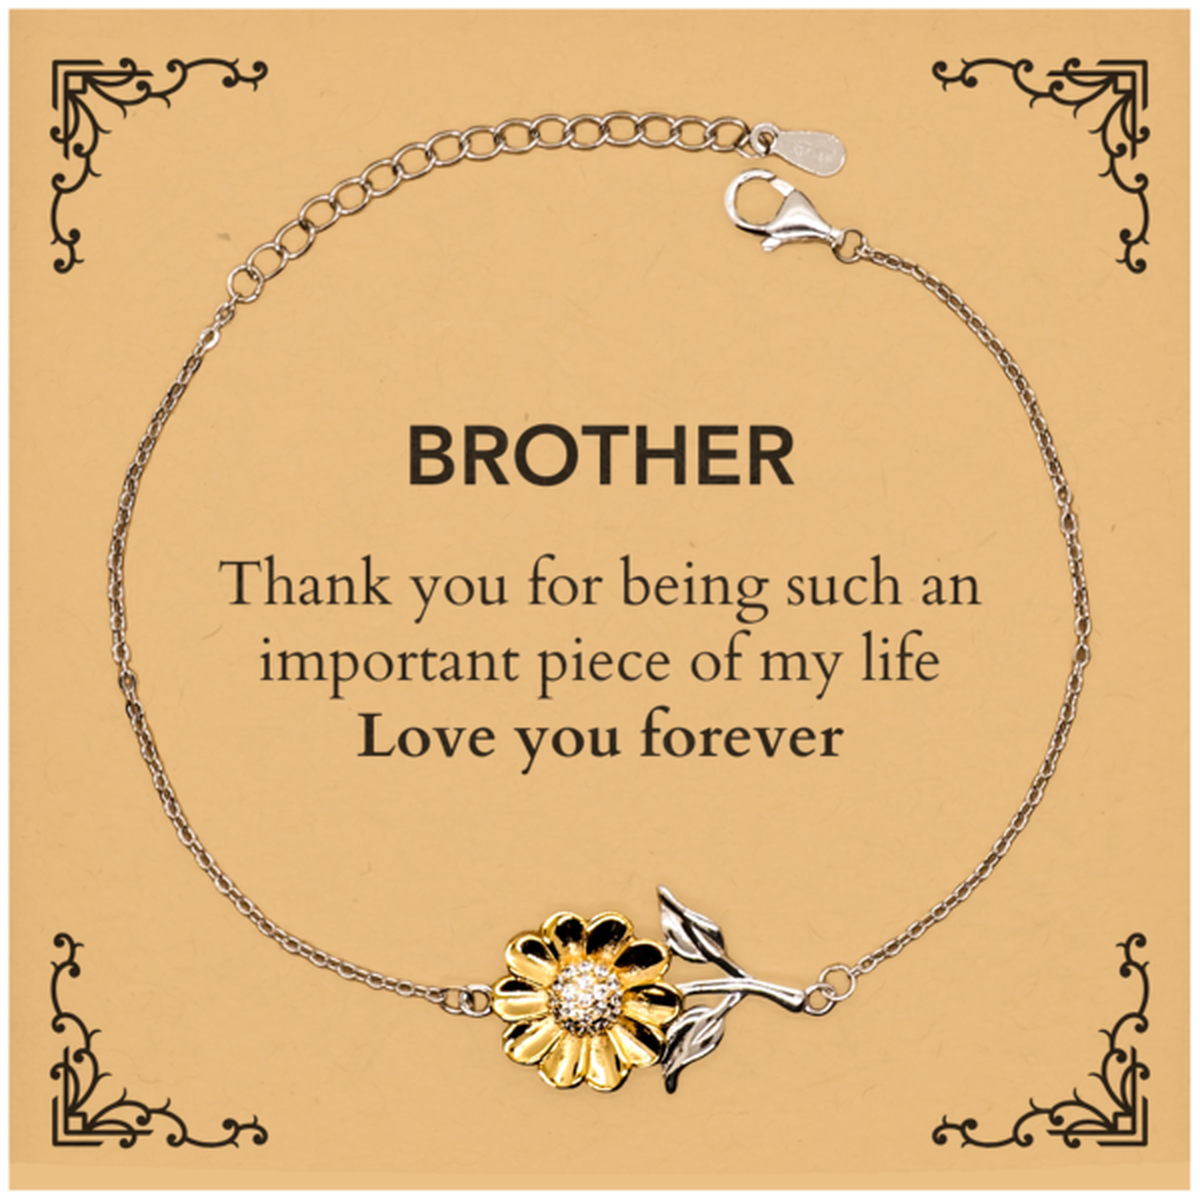 Appropriate Brother Sunflower Bracelet Epic Birthday Gifts for Brother Thank you for being such an important piece of my life Brother Christmas Mothers Fathers Day